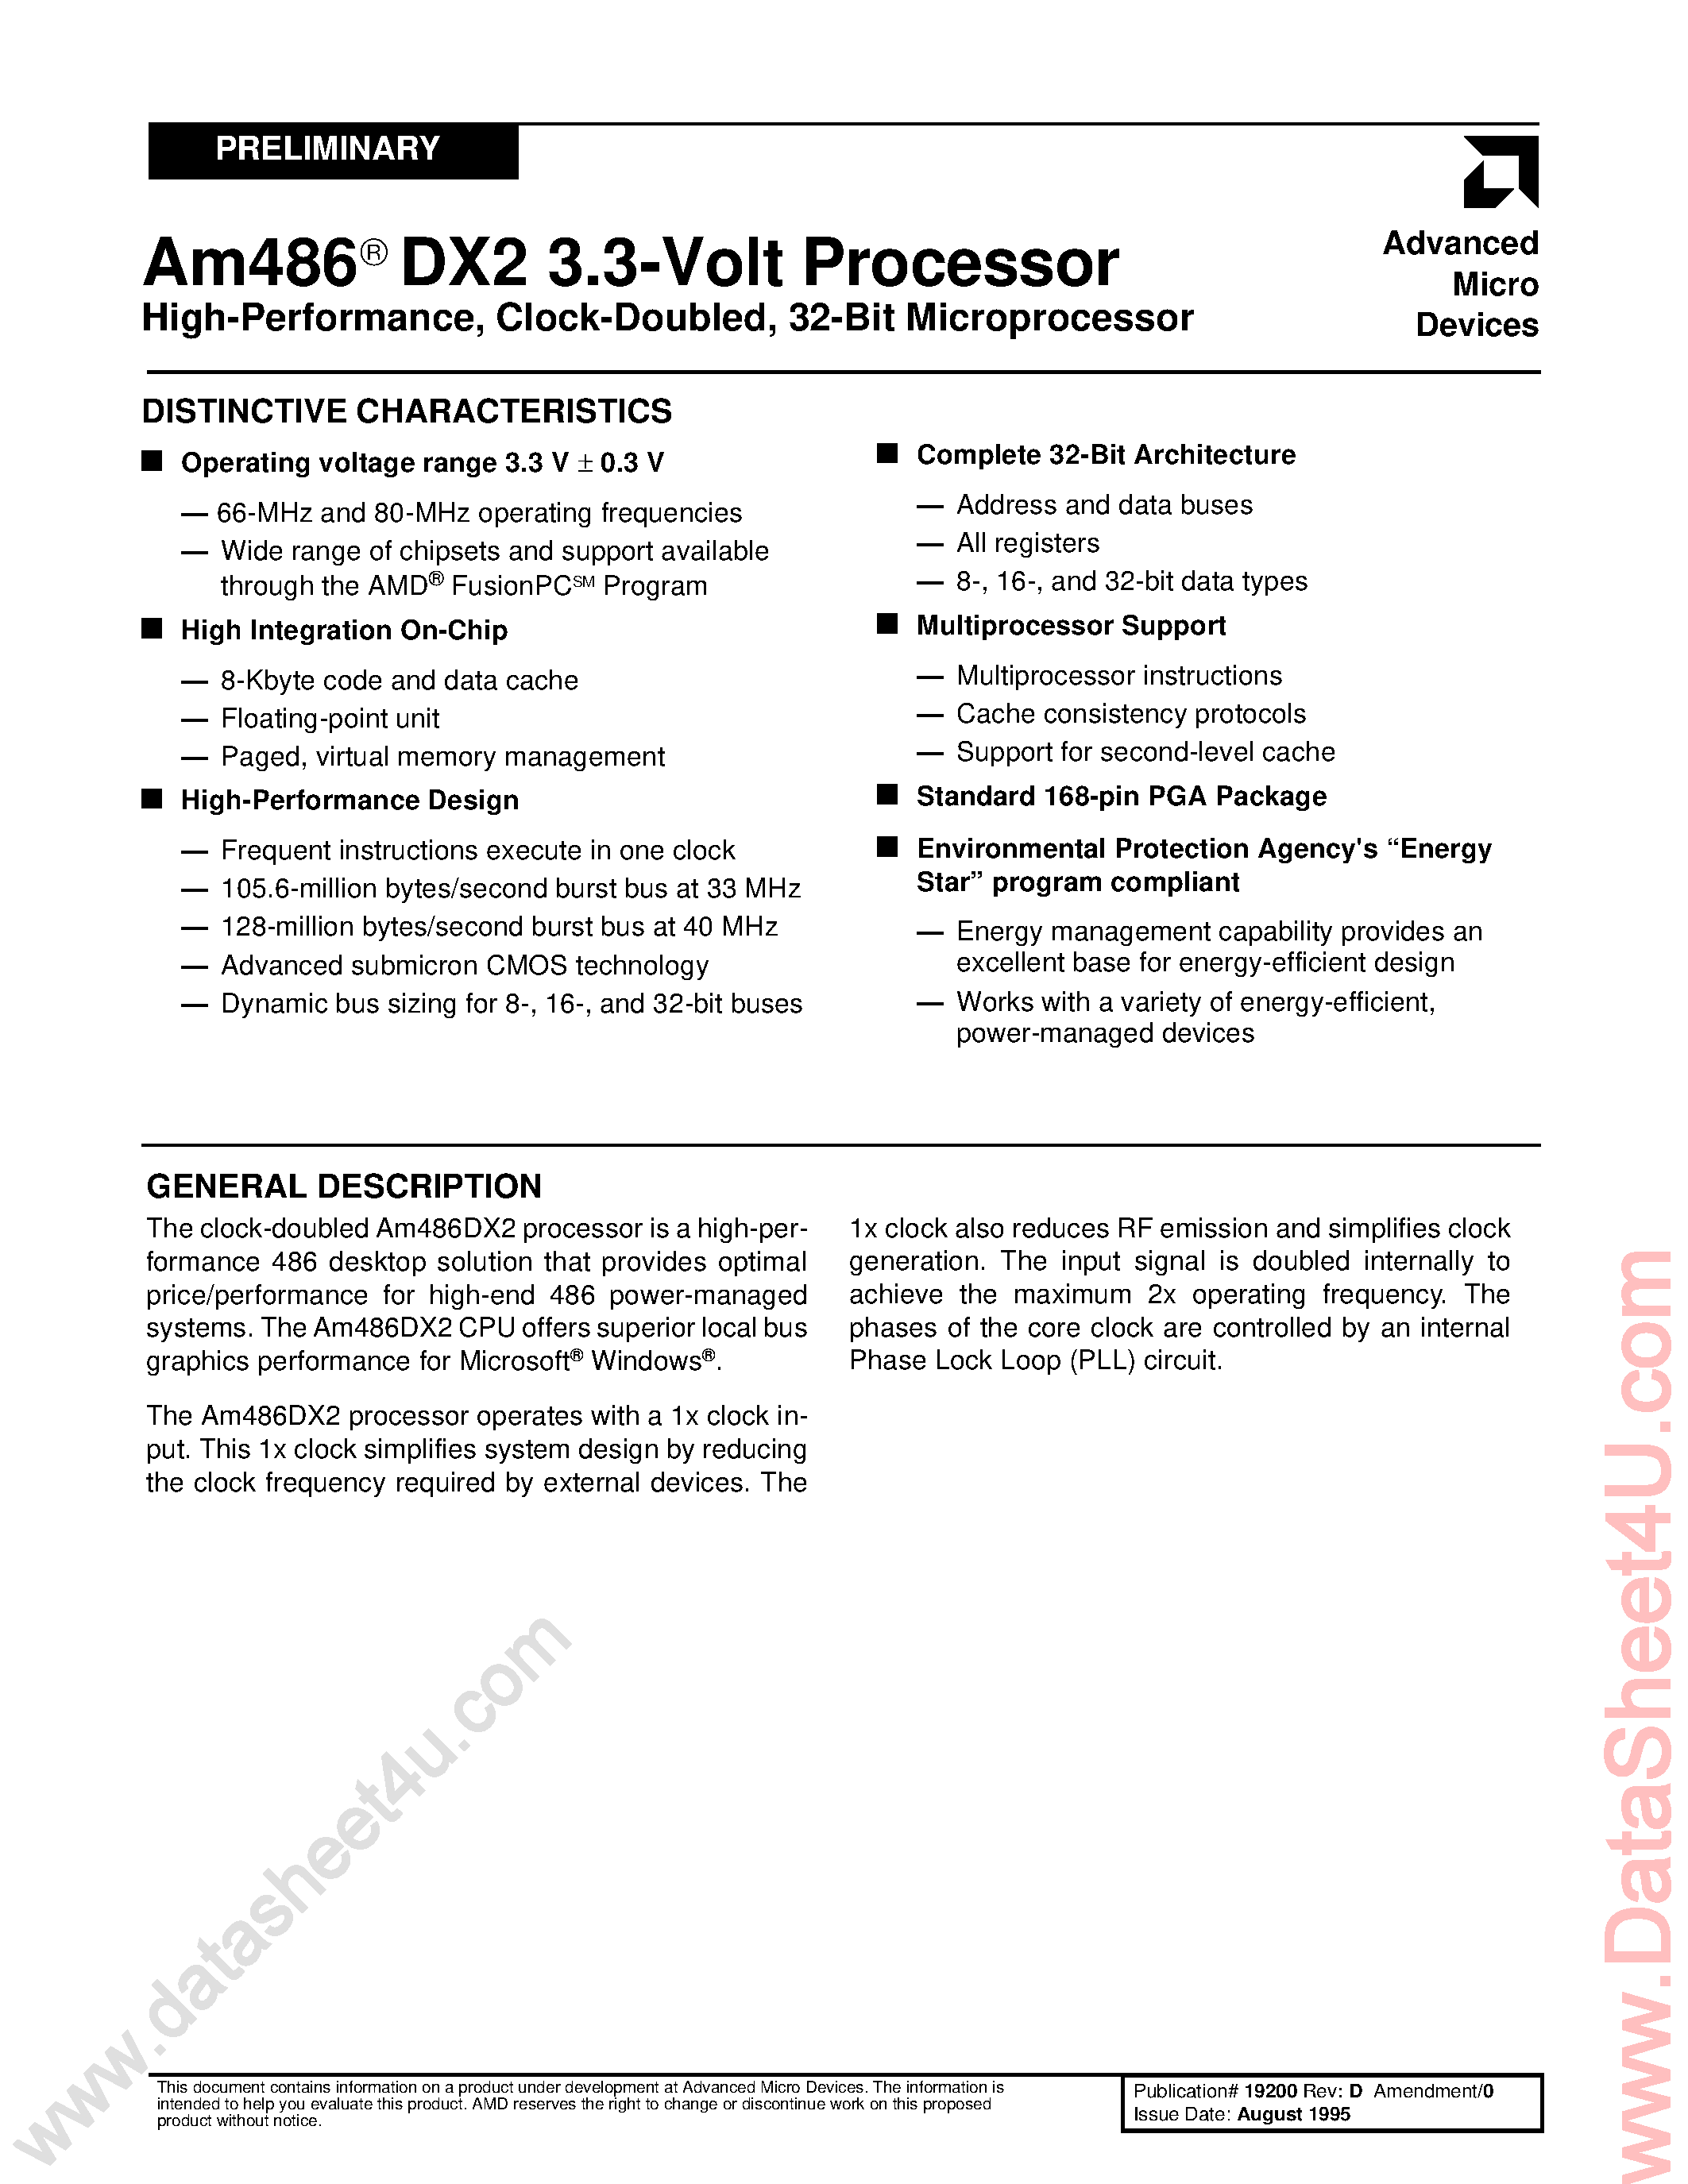 Datasheet AM486DX2 - 3.3V / Clock-Doubled / 32-Bit Microprocessor page 1